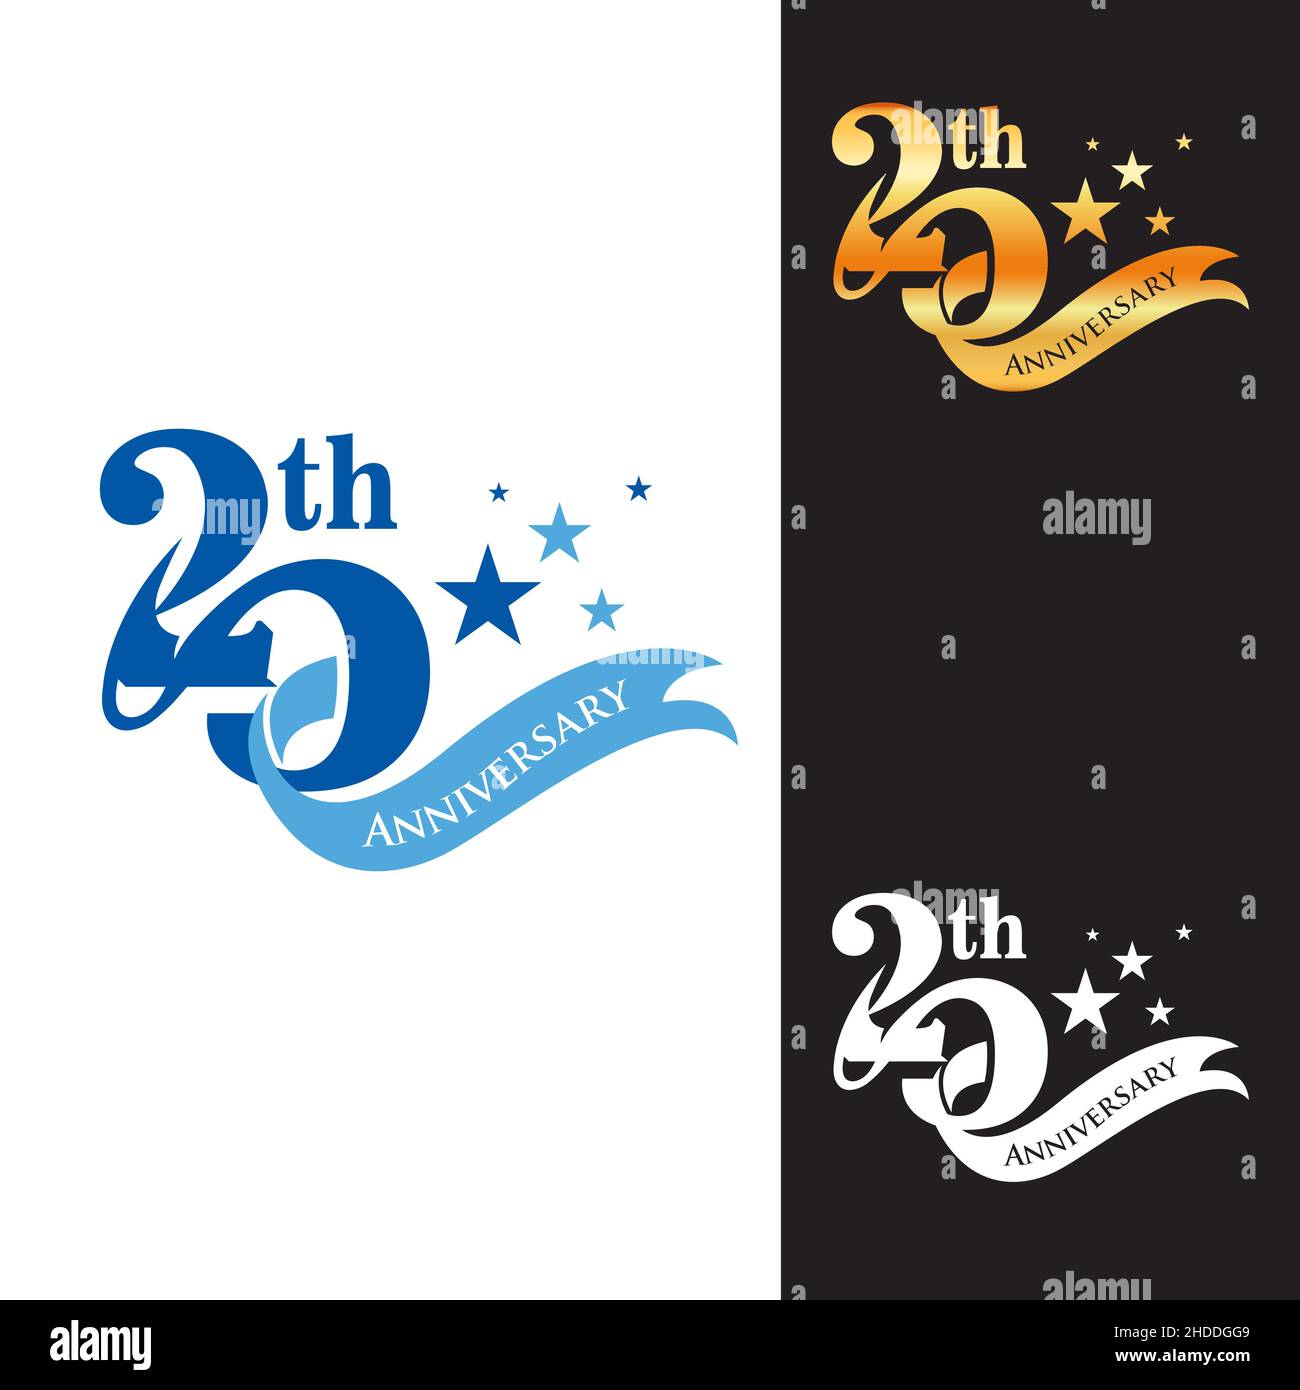 20 years anniversary celebration logotype. 20th anniversary logo collection.EPS 10 Stock Vector